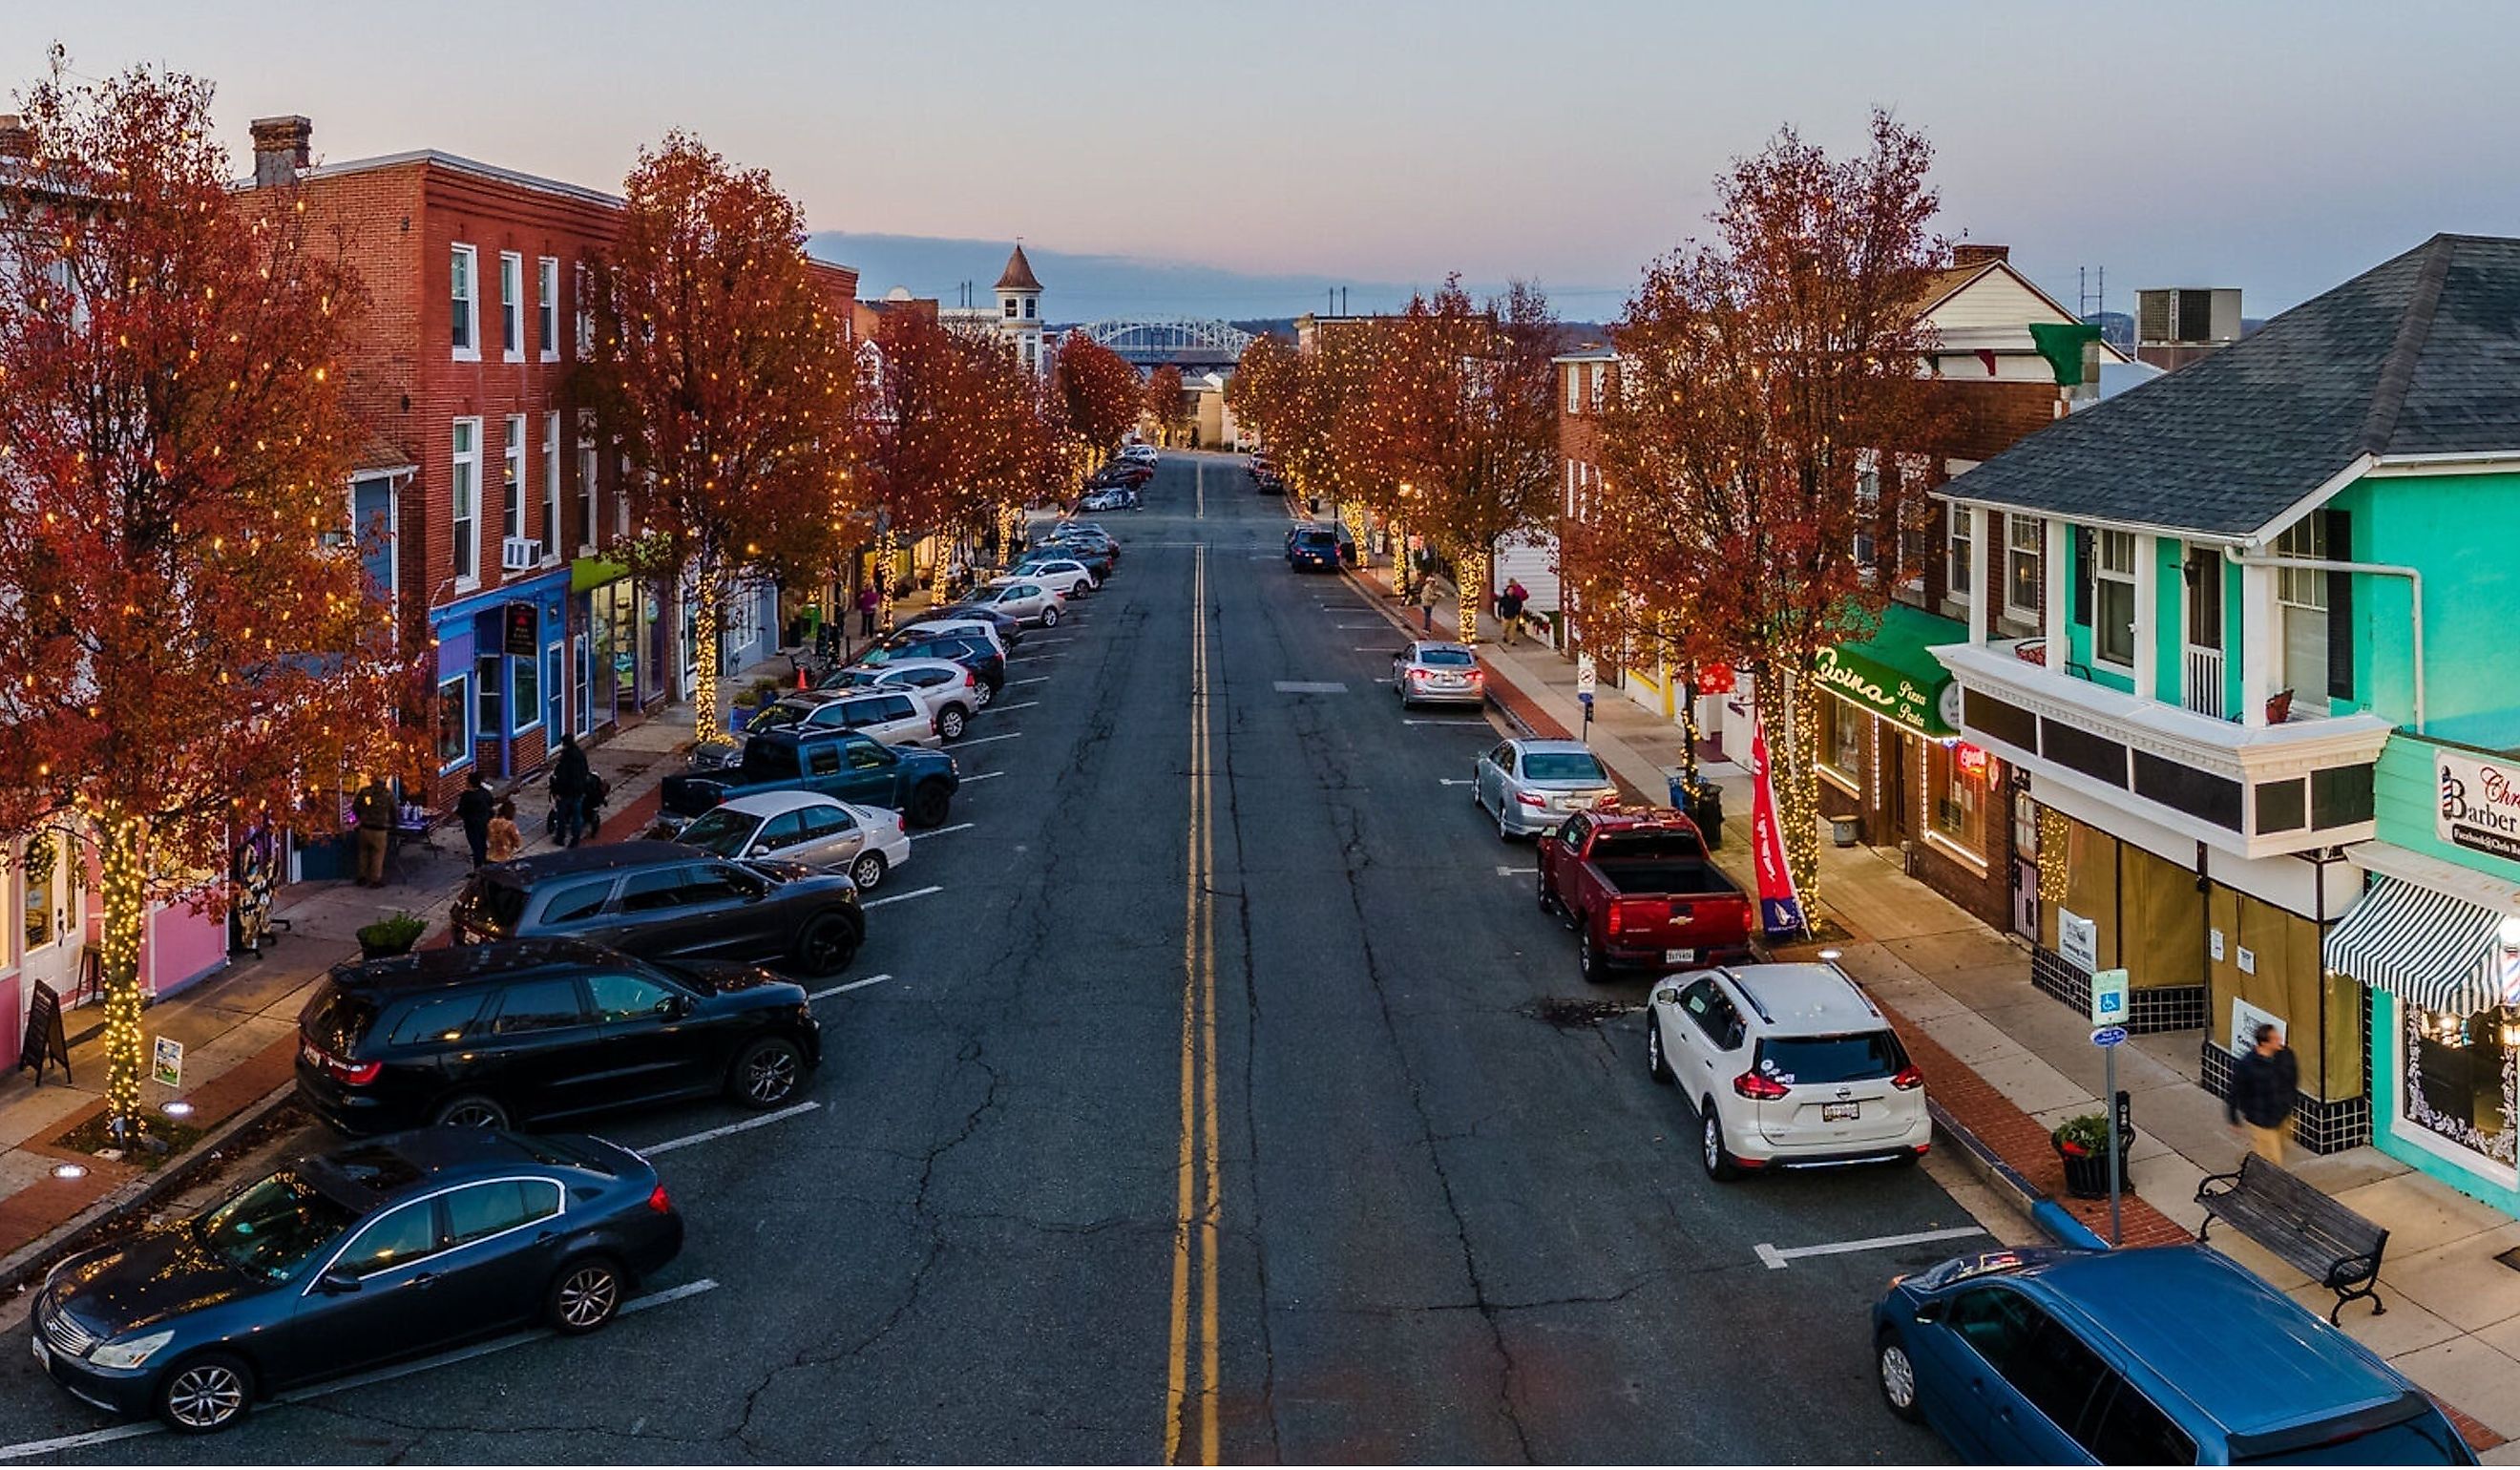 An empty street in Havre De Grace city illuminated by the golden light of dusk, with parked cars lining the sides of the road. Editorial credit: Wirestock Creators / Shutterstock.com